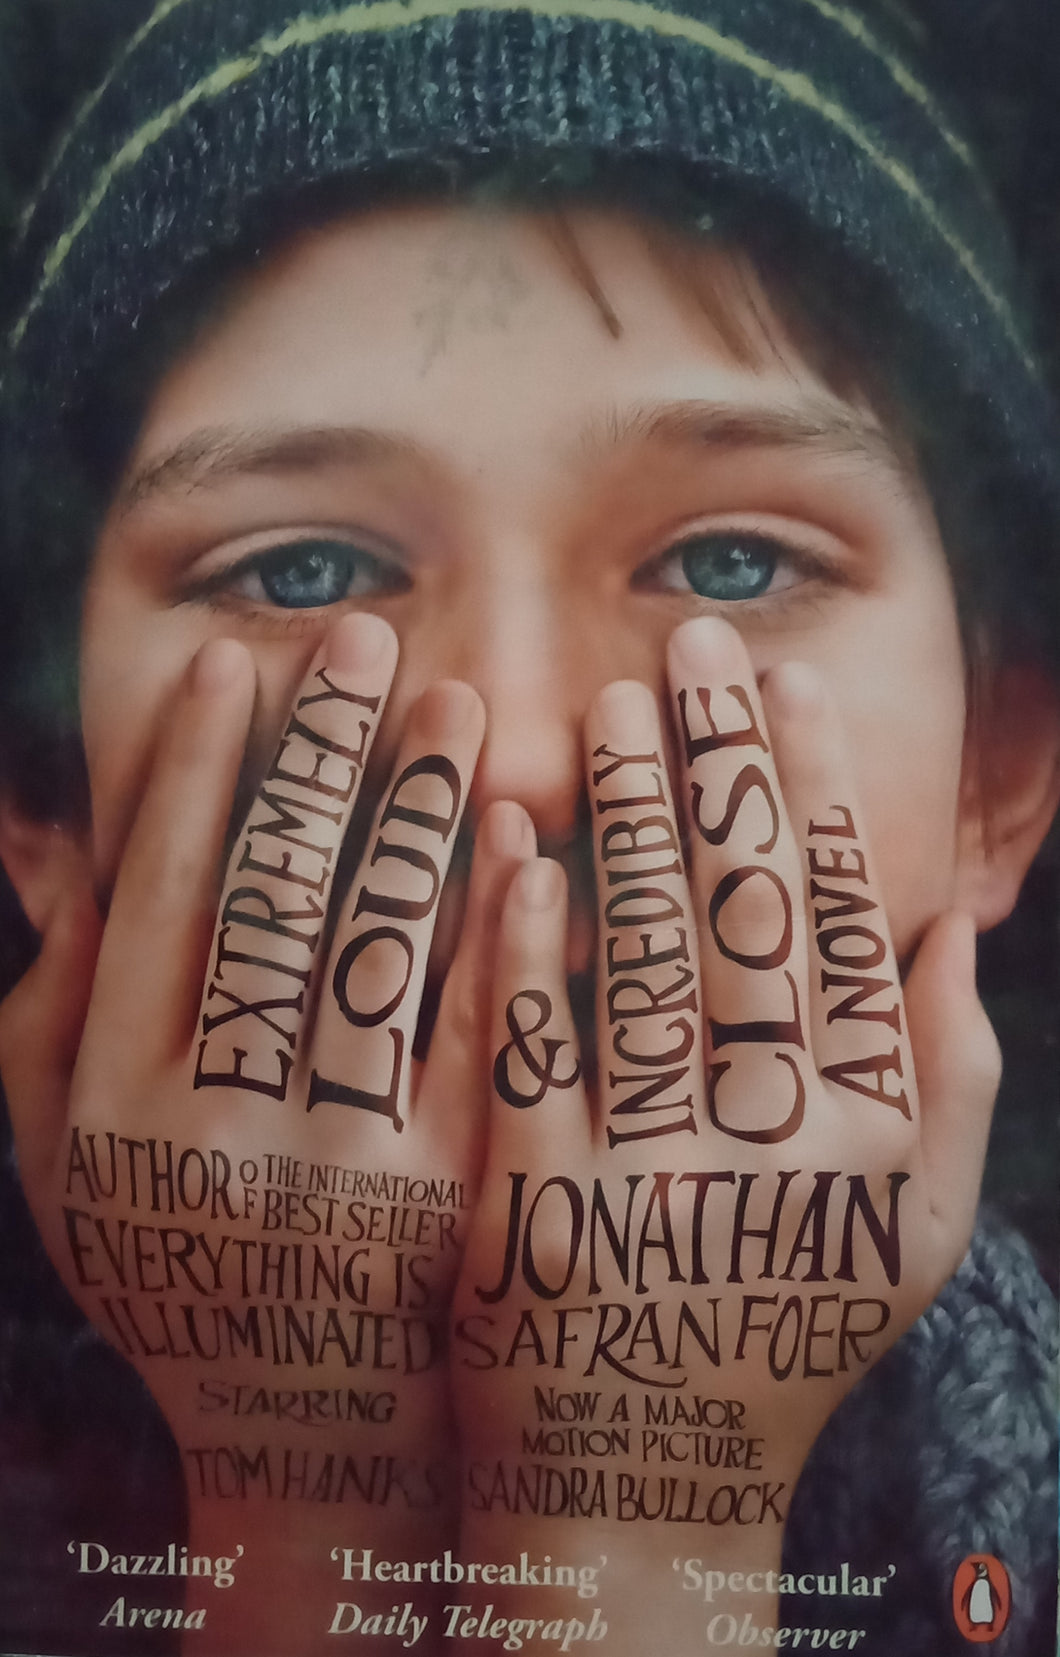 Extremely Loud & Incredibly Close A Novel by Tom Hanks